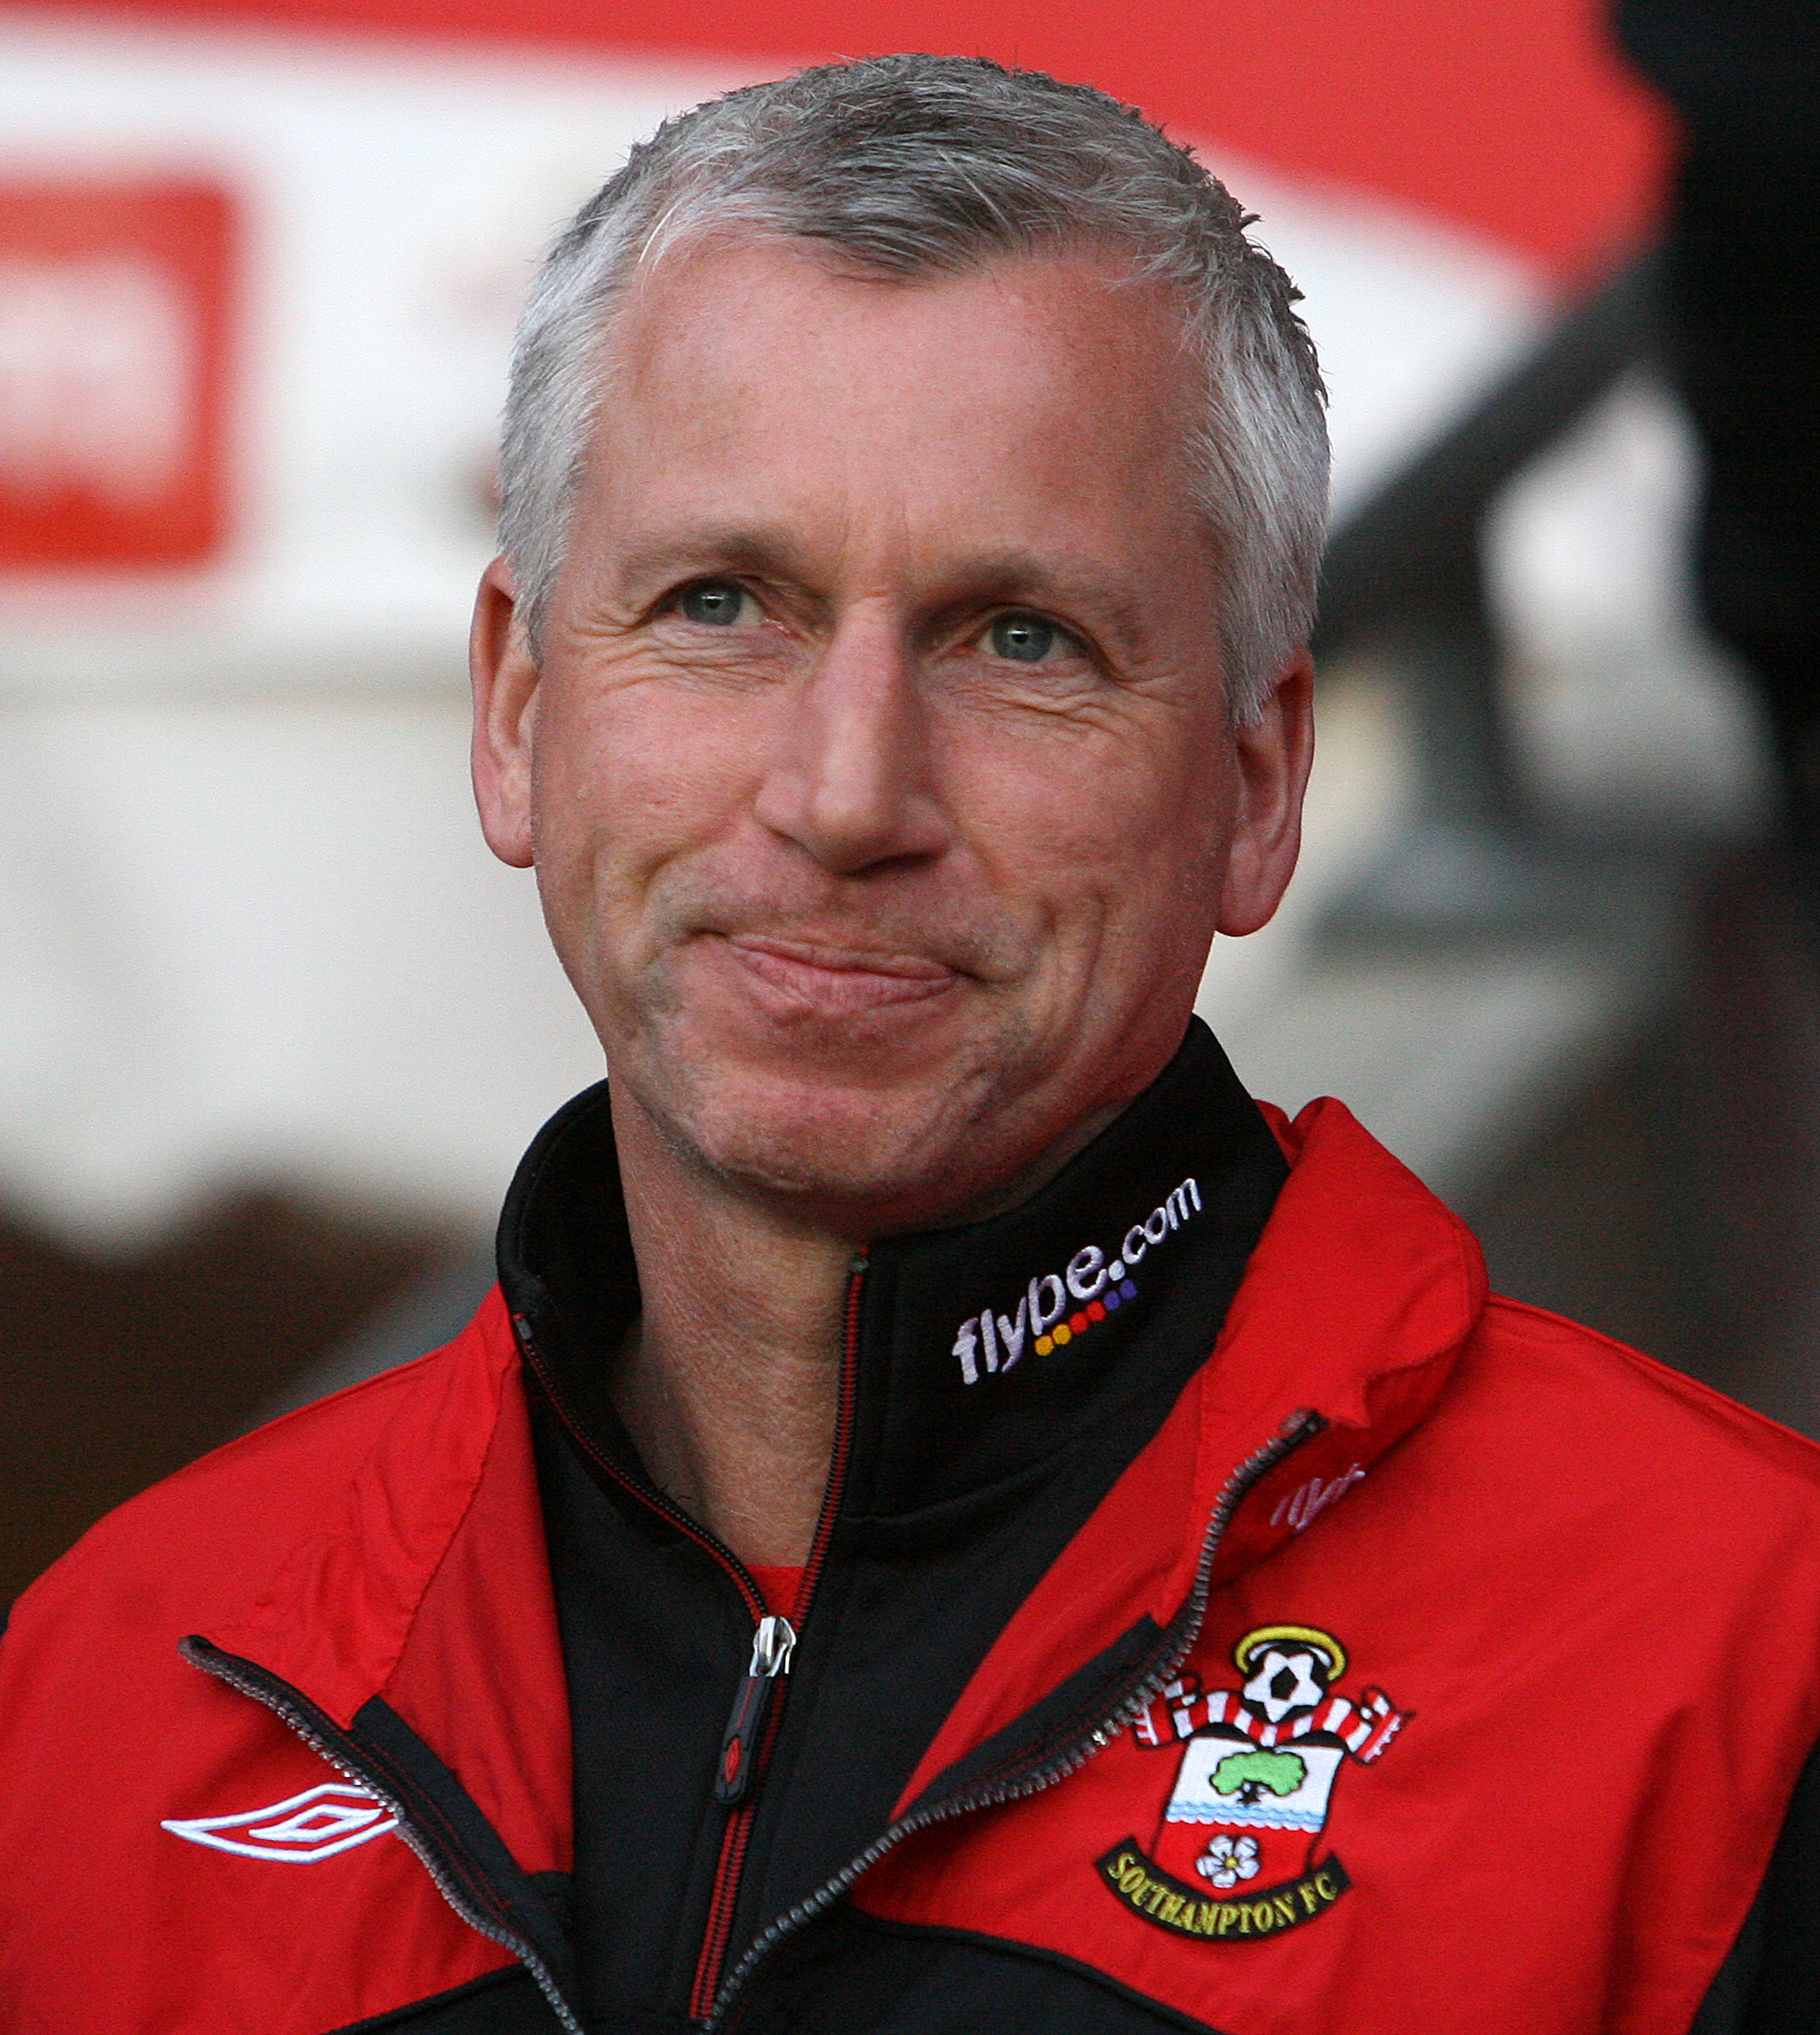 SOUTHAMPTON, ENGLAND - APRIL 20 :   Alan Pardew, Manager of Southampton looks on during the Coca-Cola League One match between Southampton and Oldham Athletic at St. Mary's Stadium on April 20, 2010 in Southampton, England.  (Photo by Jan Kruger/Getty Ima